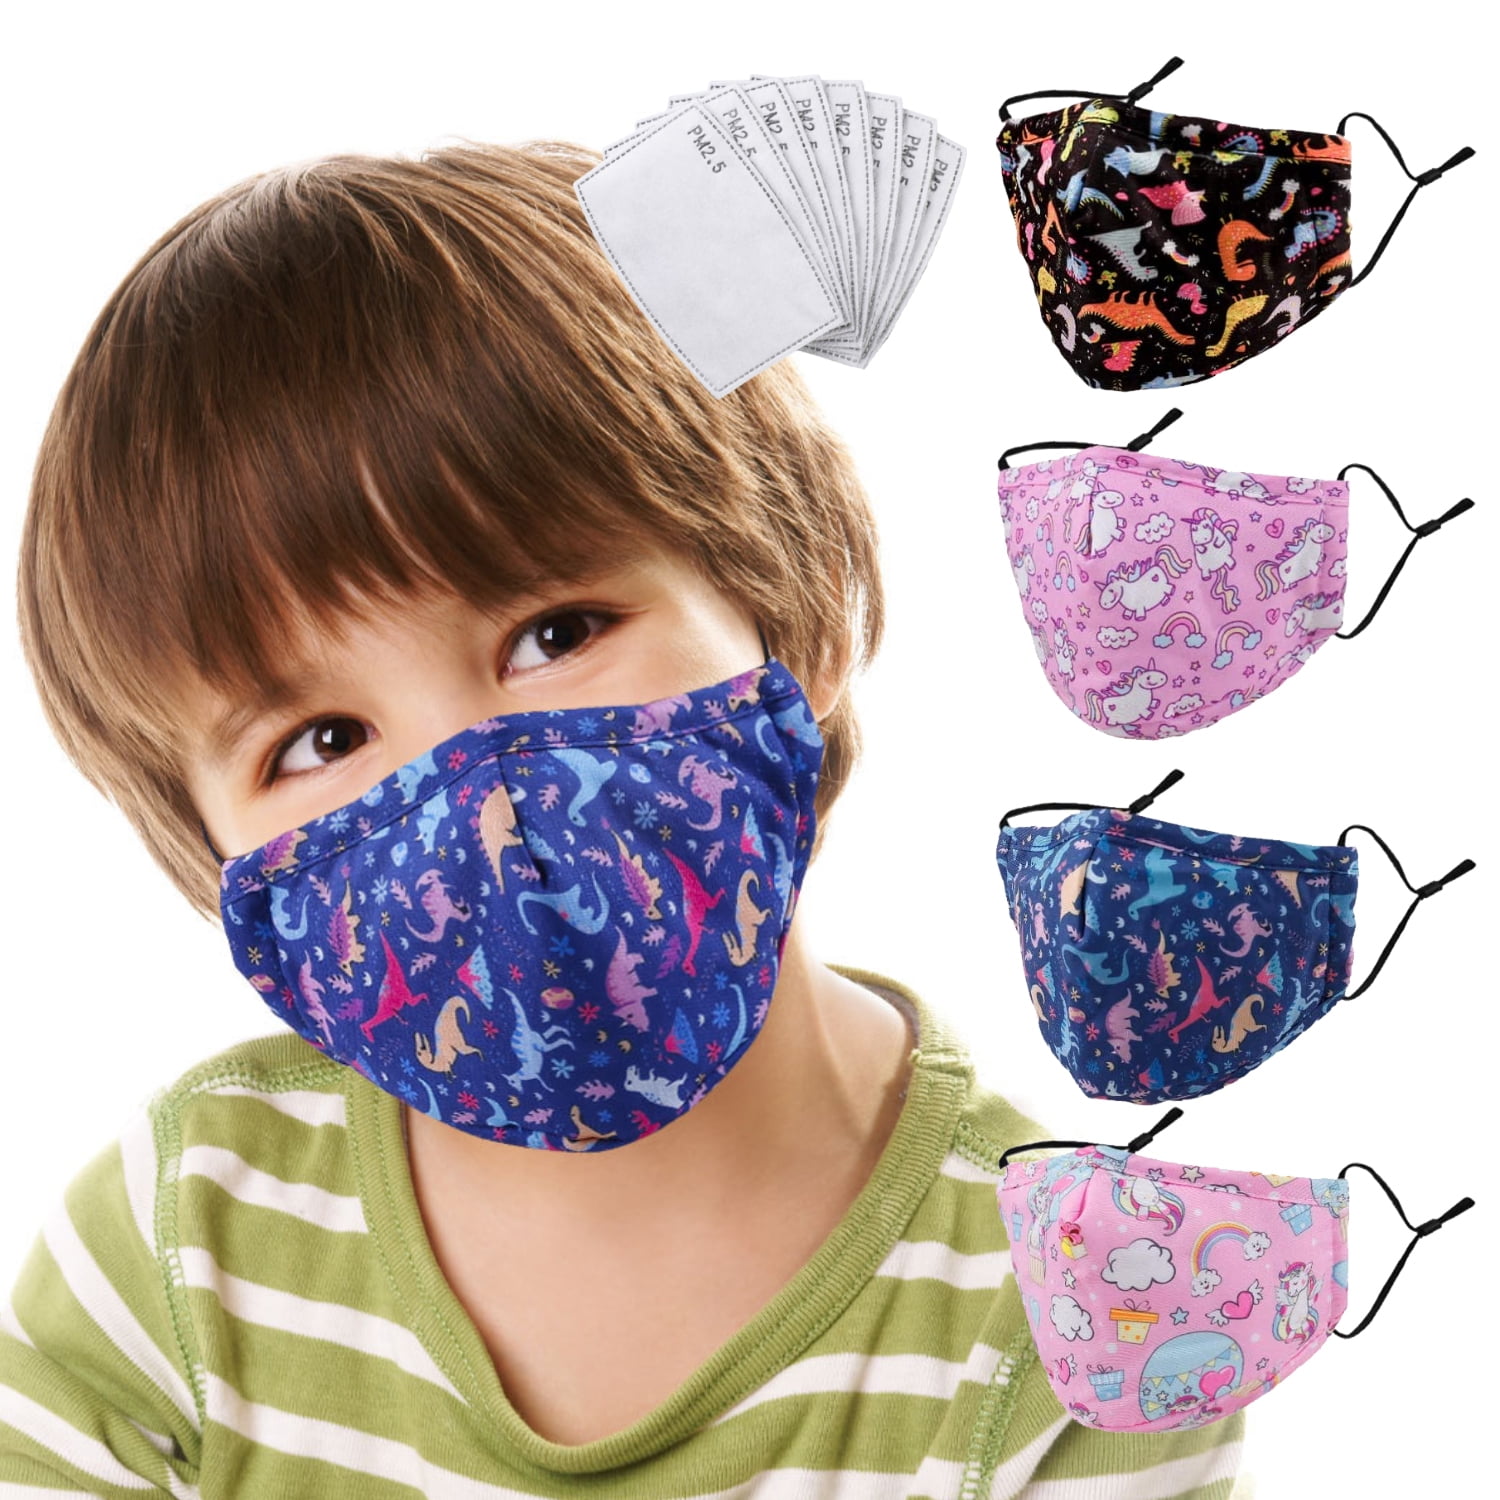 Cute Cartoon Breathable Non-woven Protective Mouth Cover TOPMU 50 Pcs Kids Disposable Face Shields,3-Ply with Elastic Earloops Waterproof,Odor Proof,Skin-friendly Durable Christmas Pengu Face Bandanas for Boys,Girls and Todders School,Outdoor,Anti-dust 